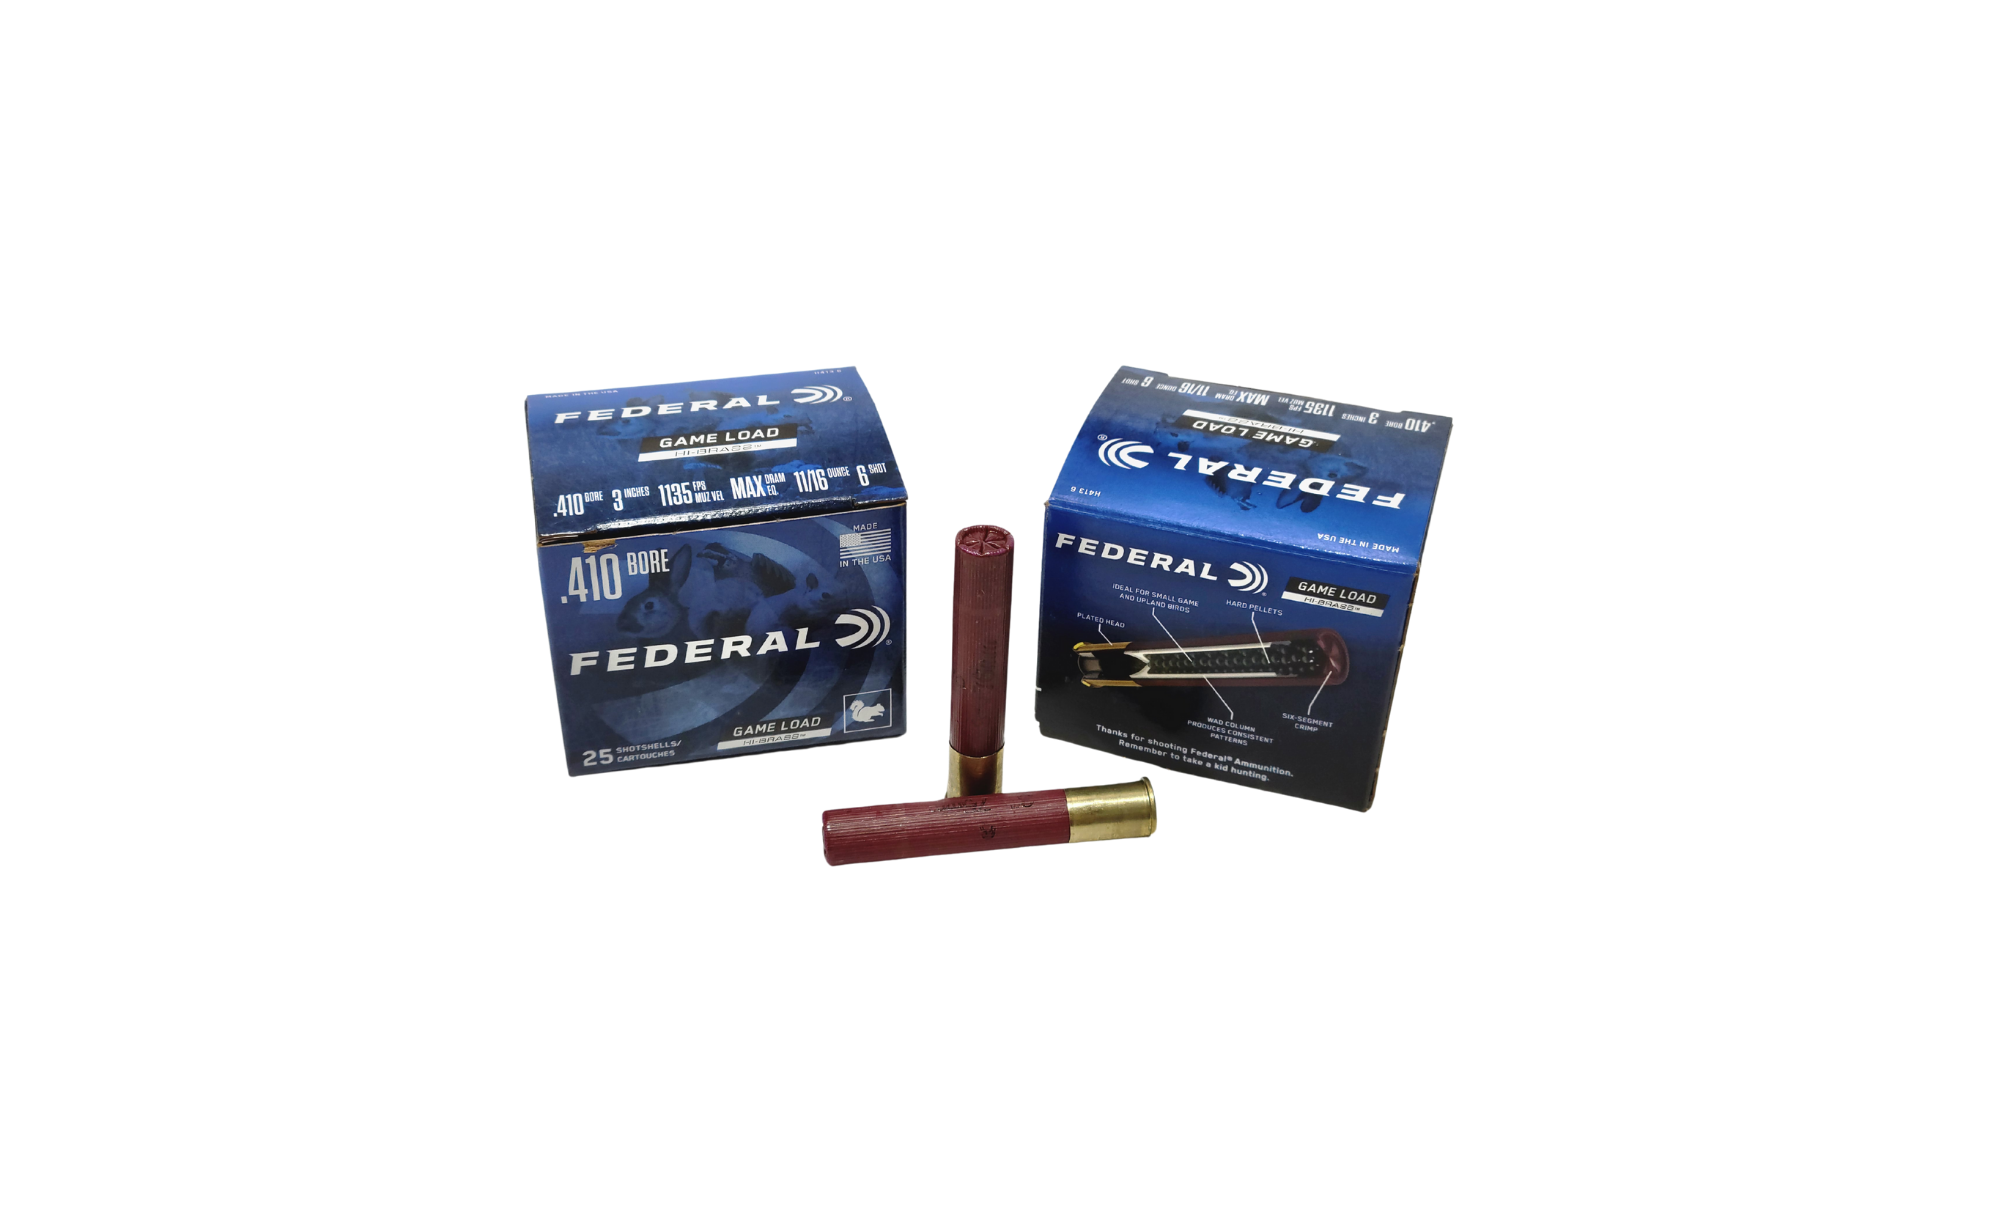 Federal .410 Bore Game Load 3" 11/16 oz. #6 Shot 1135 FPS - 25 Rounds (Box) [NO TAX outside Texas] FREE SHIPPING OVER $199